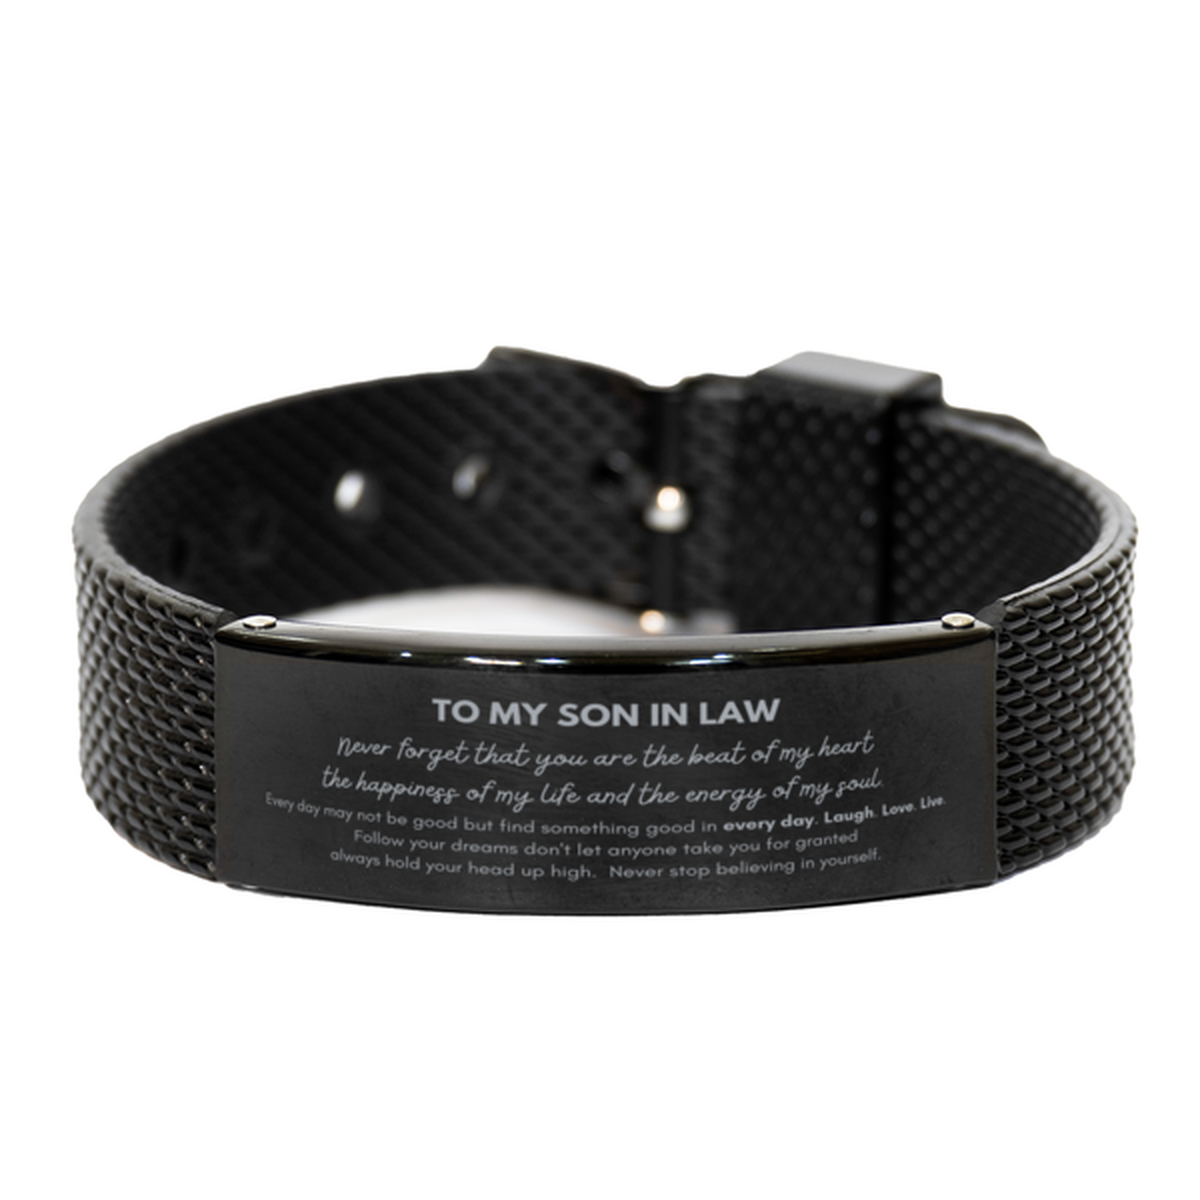 To My Son In Law Bracelet Gifts, Christmas Son In Law Black Shark Mesh Bracelet Present, Birthday Unique Motivational For Son In Law, To My Son In Law Never forget that you are the beat of my heart the happiness of my life and the energy of my soul